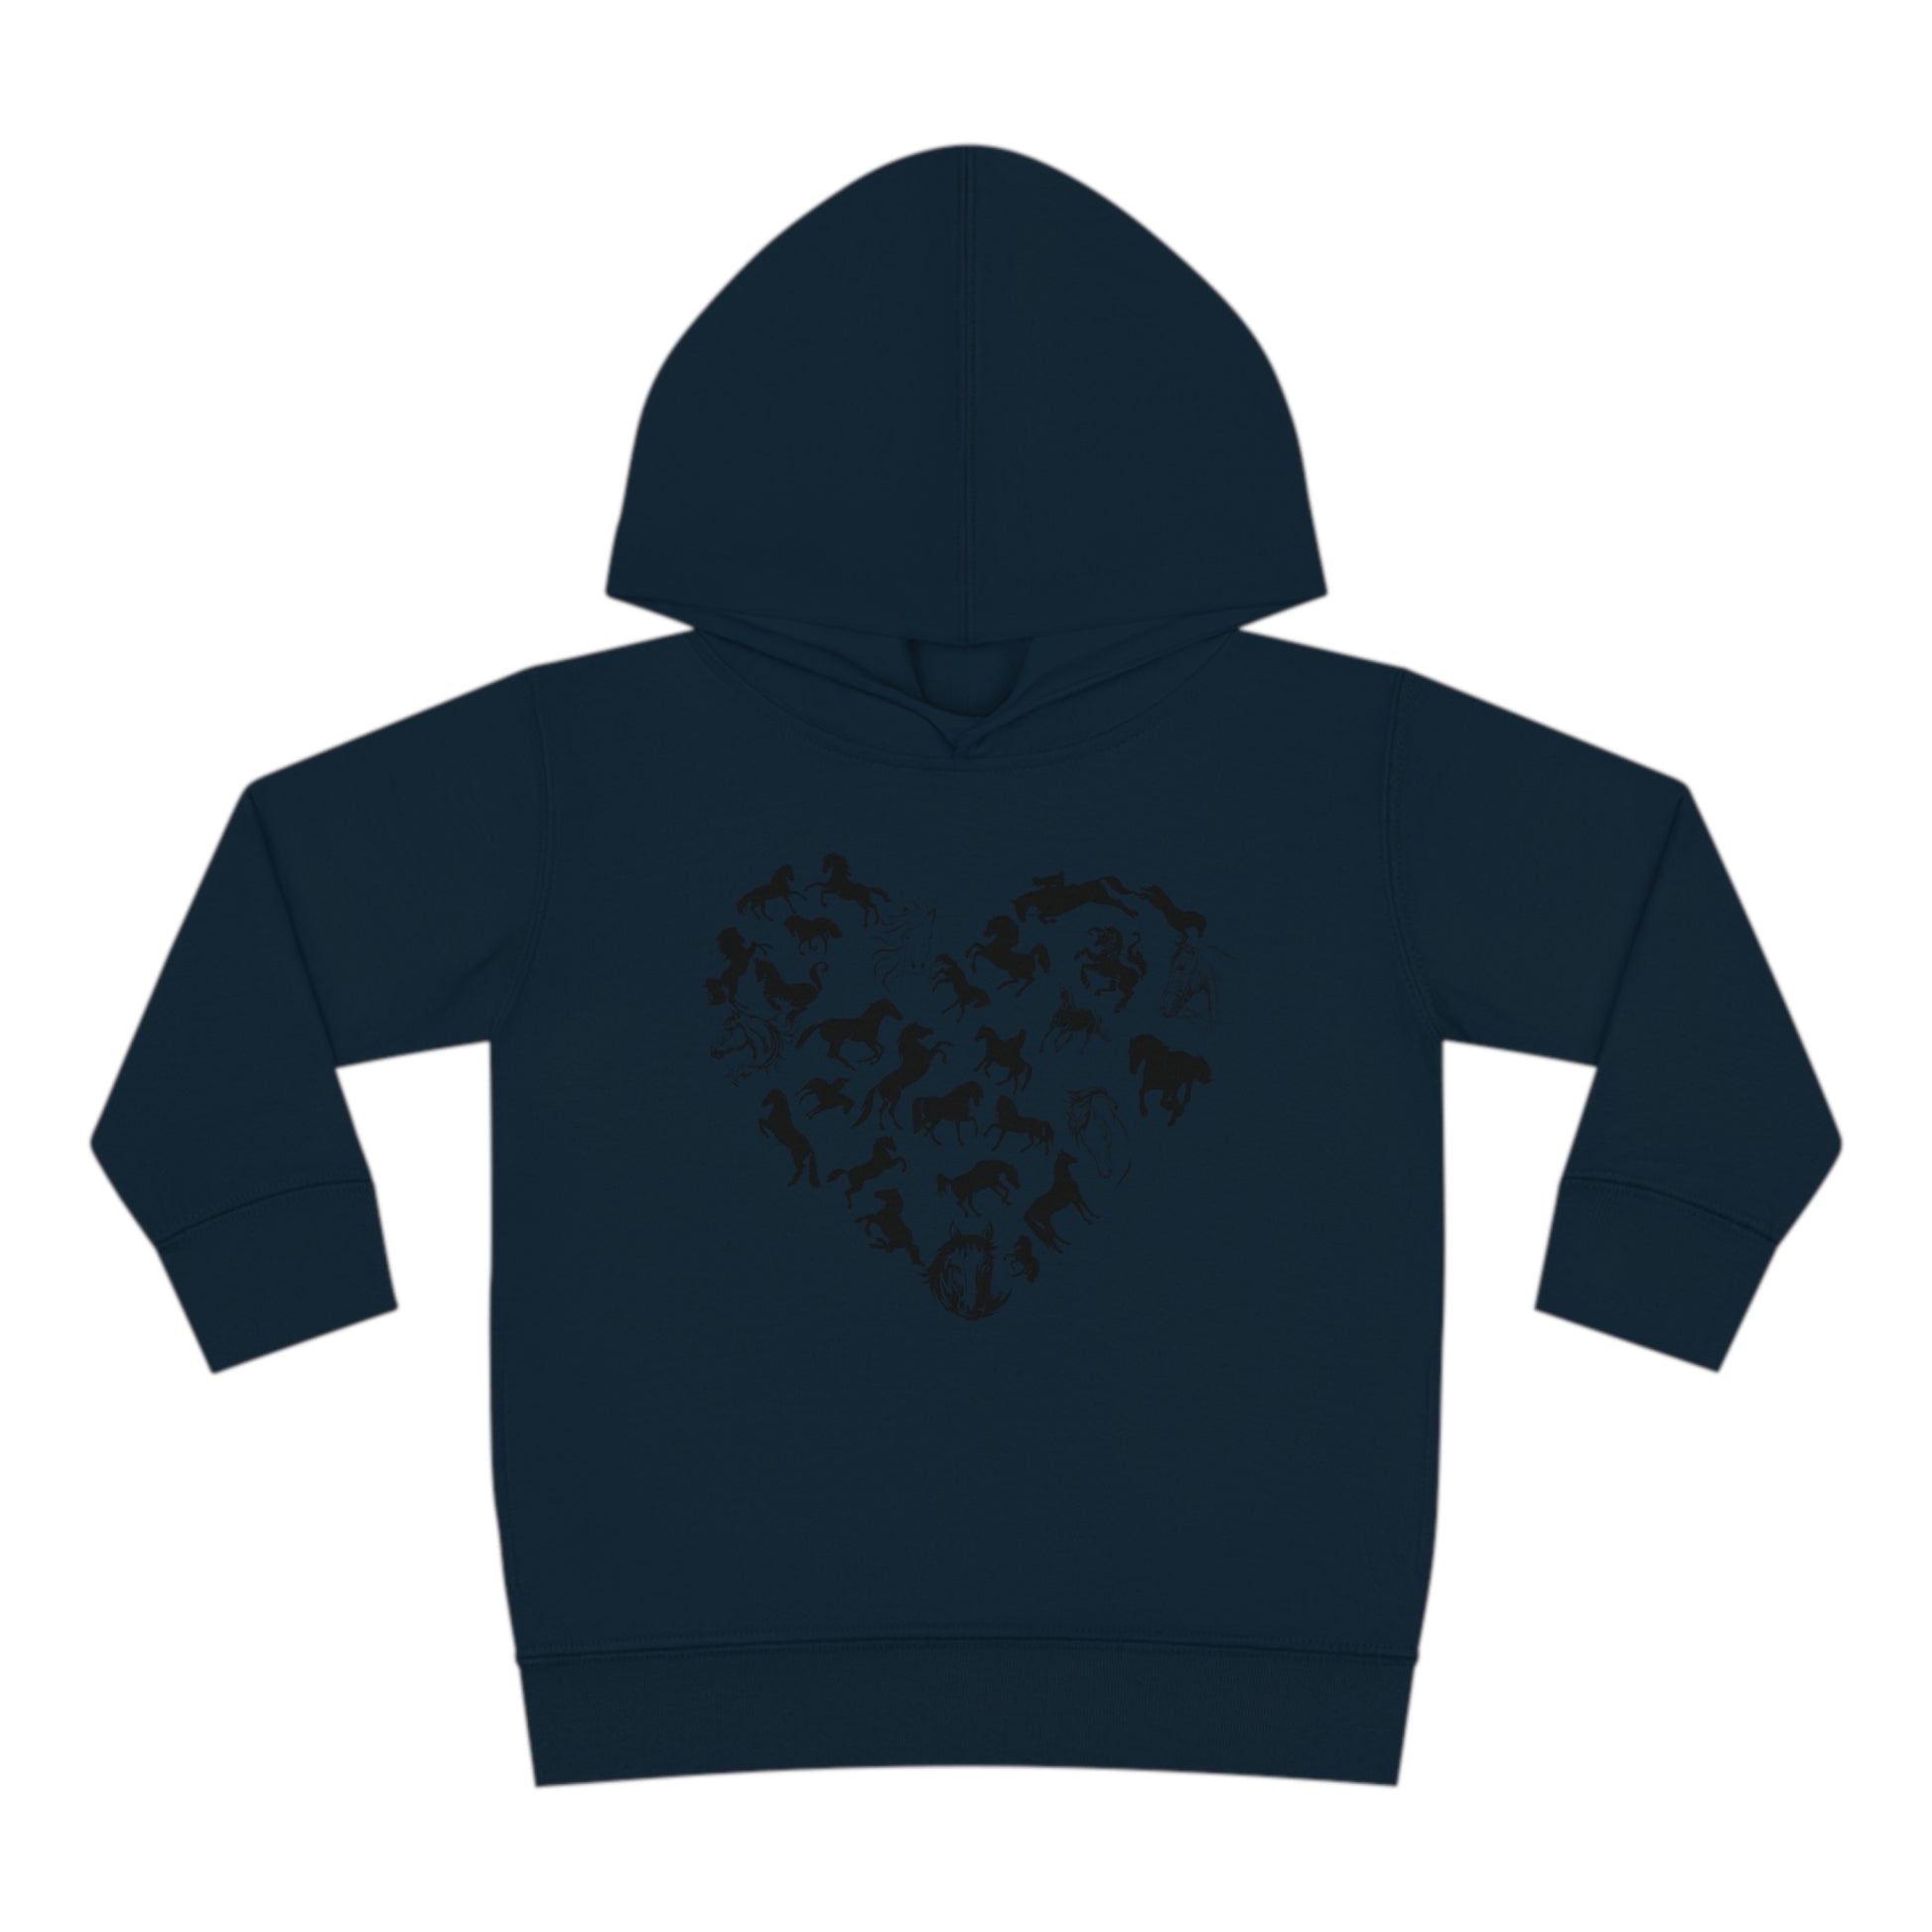 Horse Heart Hoodie | Horse Lover Tee - Horses Heart Toddler - Horse Lover Gift - Horse Toddler Shirt - Equestrian Tee - Gift for Horse Owner Kids clothes Navy 2T 